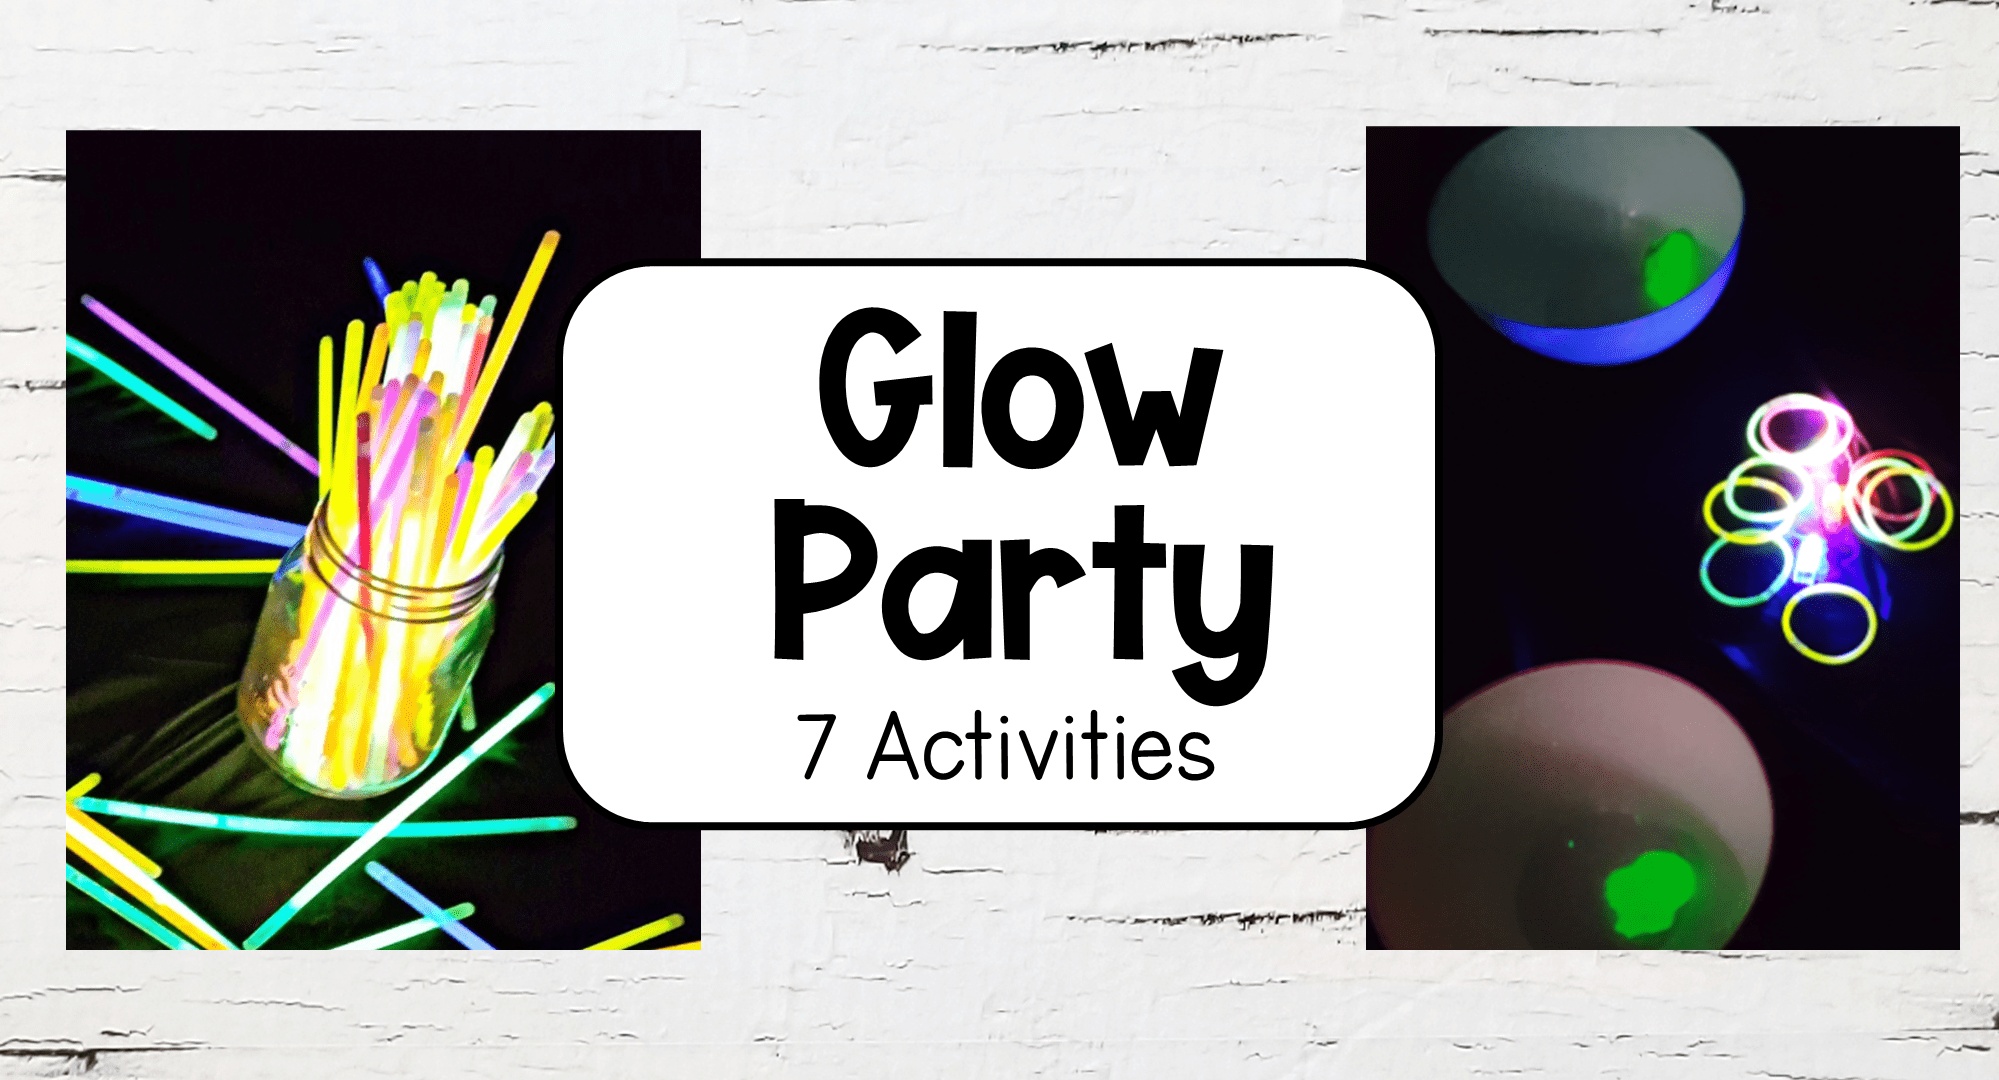 Glow Party Ideas for Kids - Hands-On Teaching Ideas